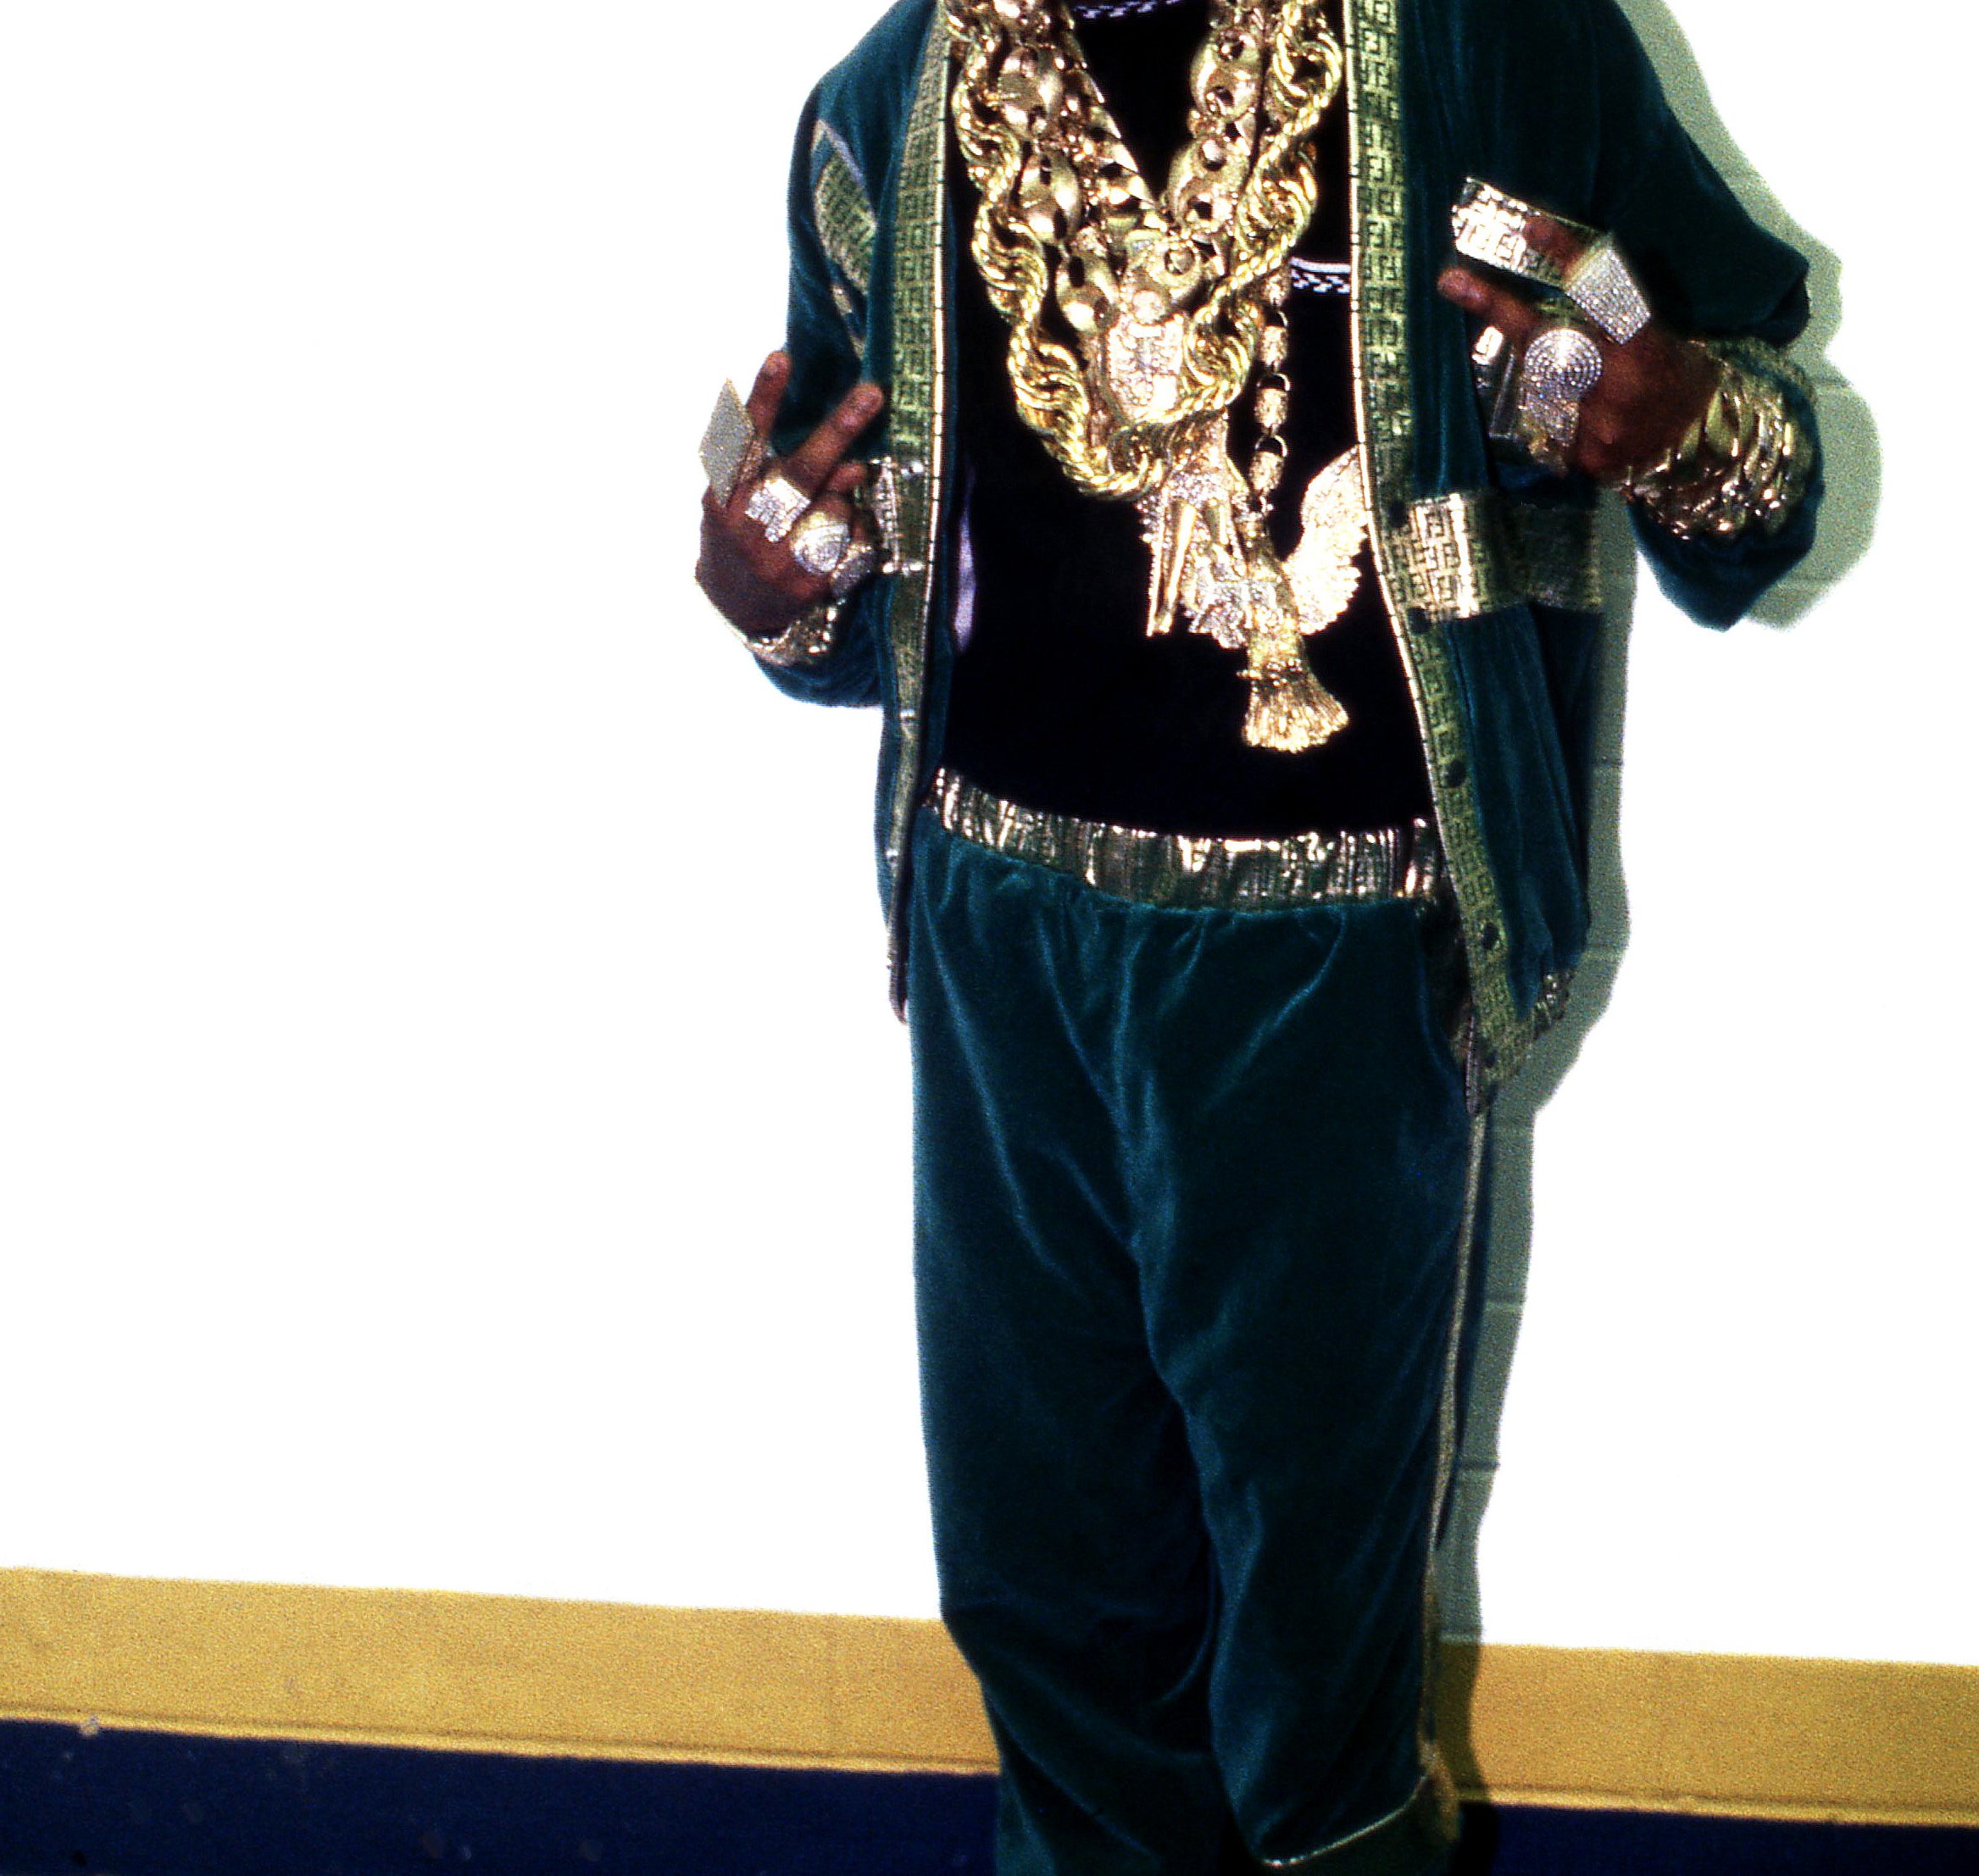 Rapper Slick Rick (Richard Martin Lloyd Walters) poses for photos backstage after his performance at The Arena in St. Louis, Missouri in August 1989